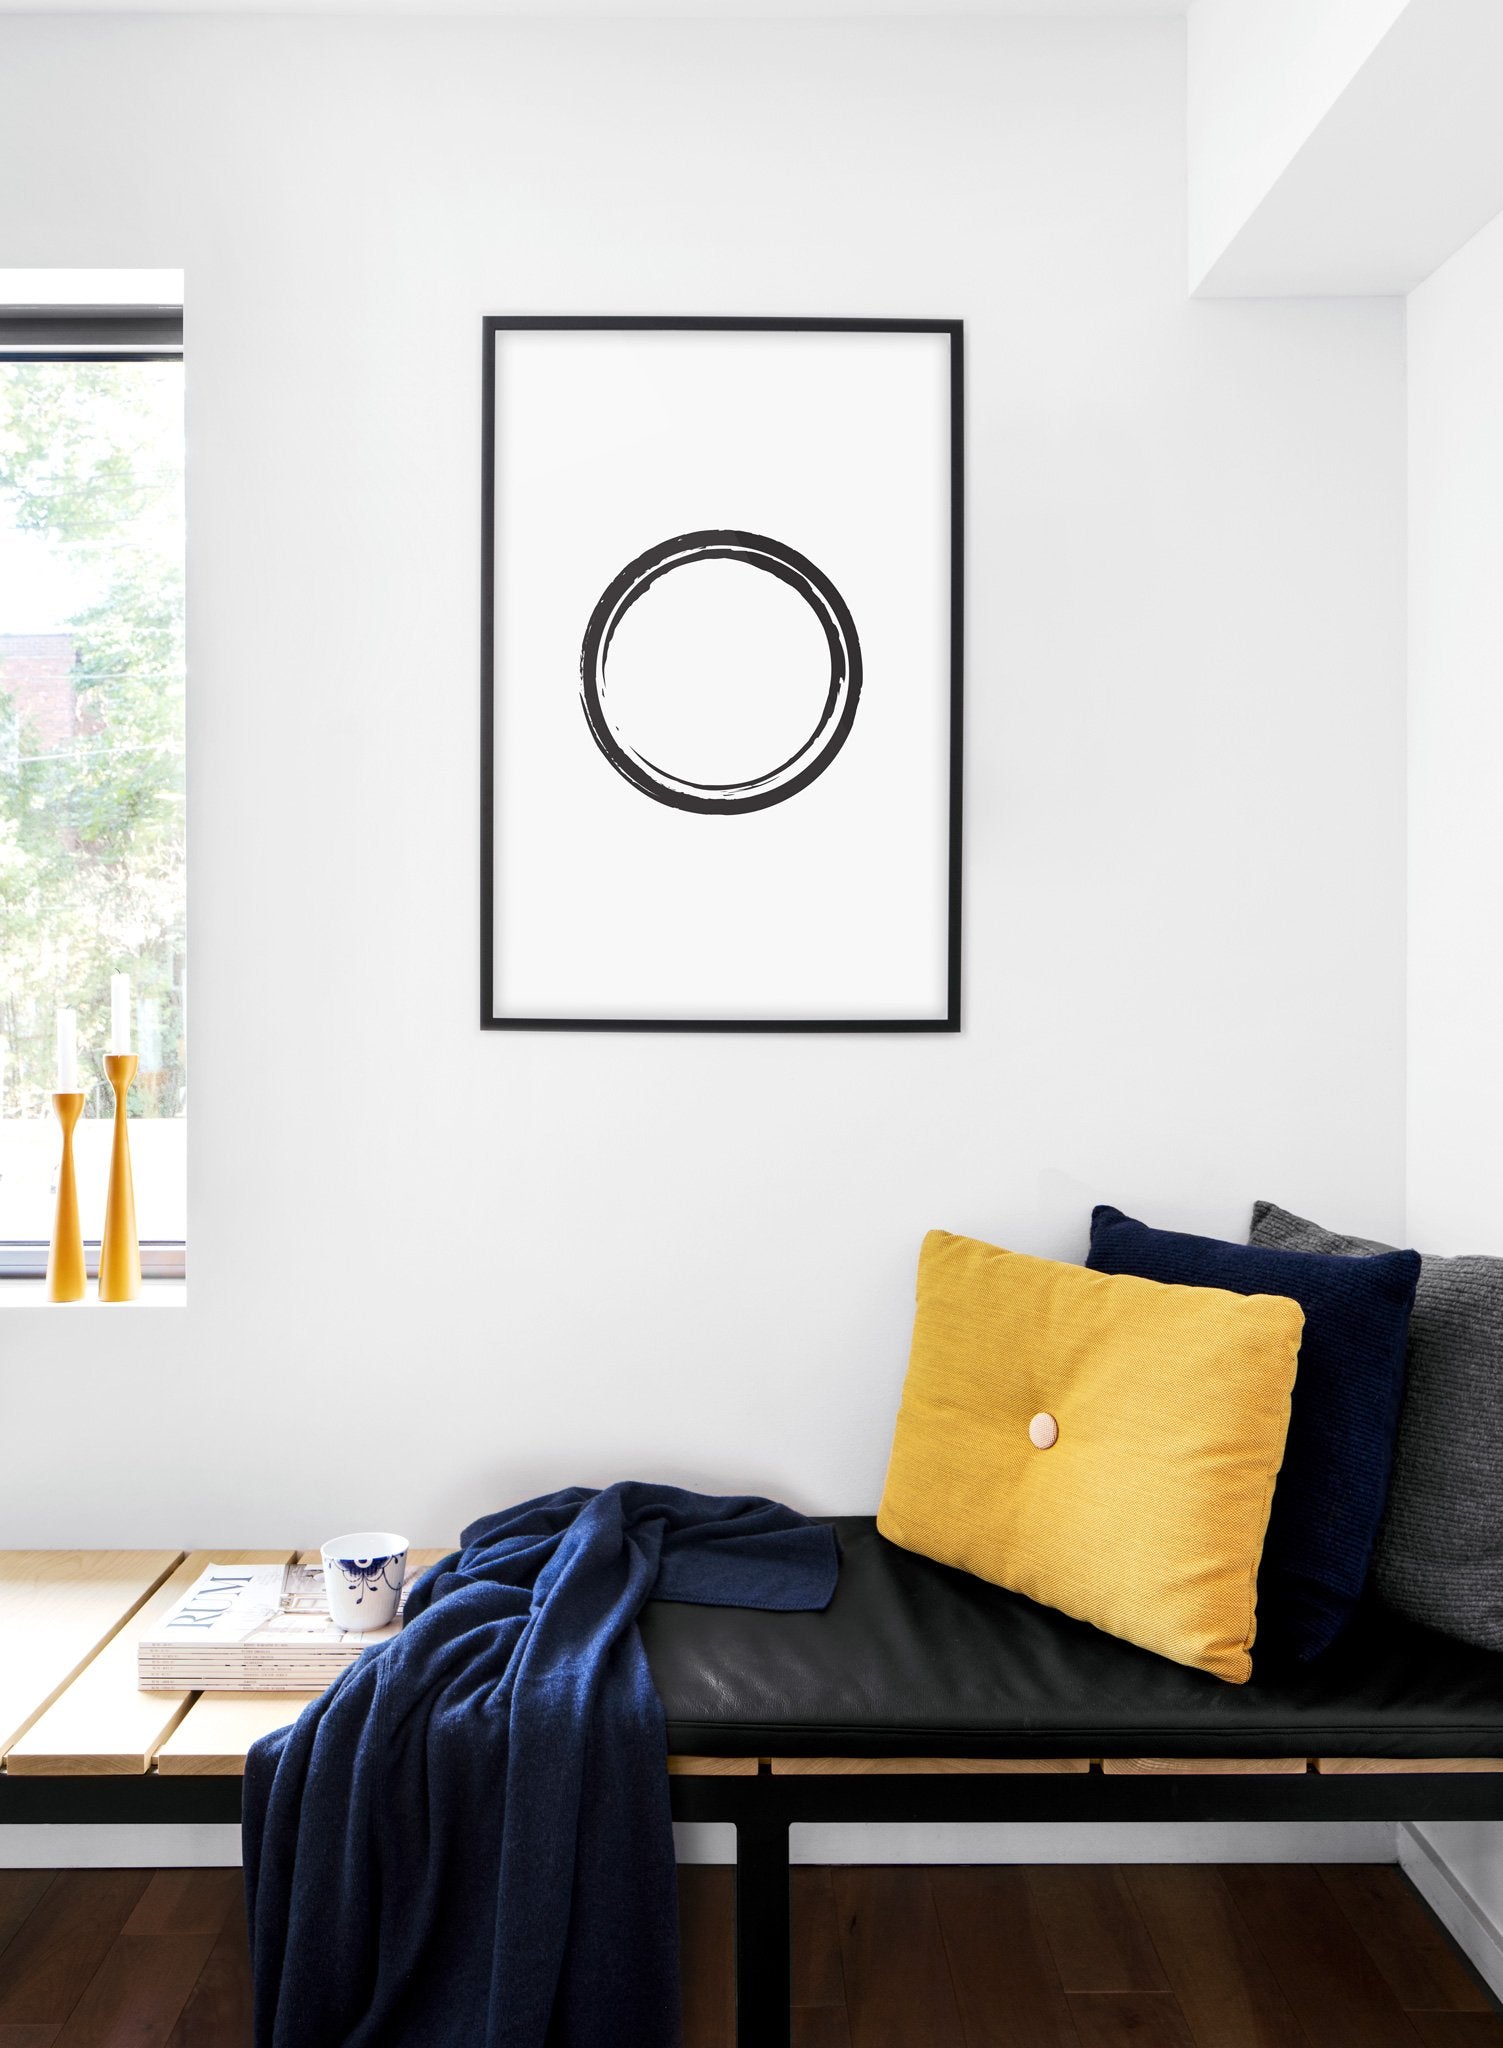 Scandinavian poster by Opposite Wall with Black Circle hand-made art design - Cozy living room nook